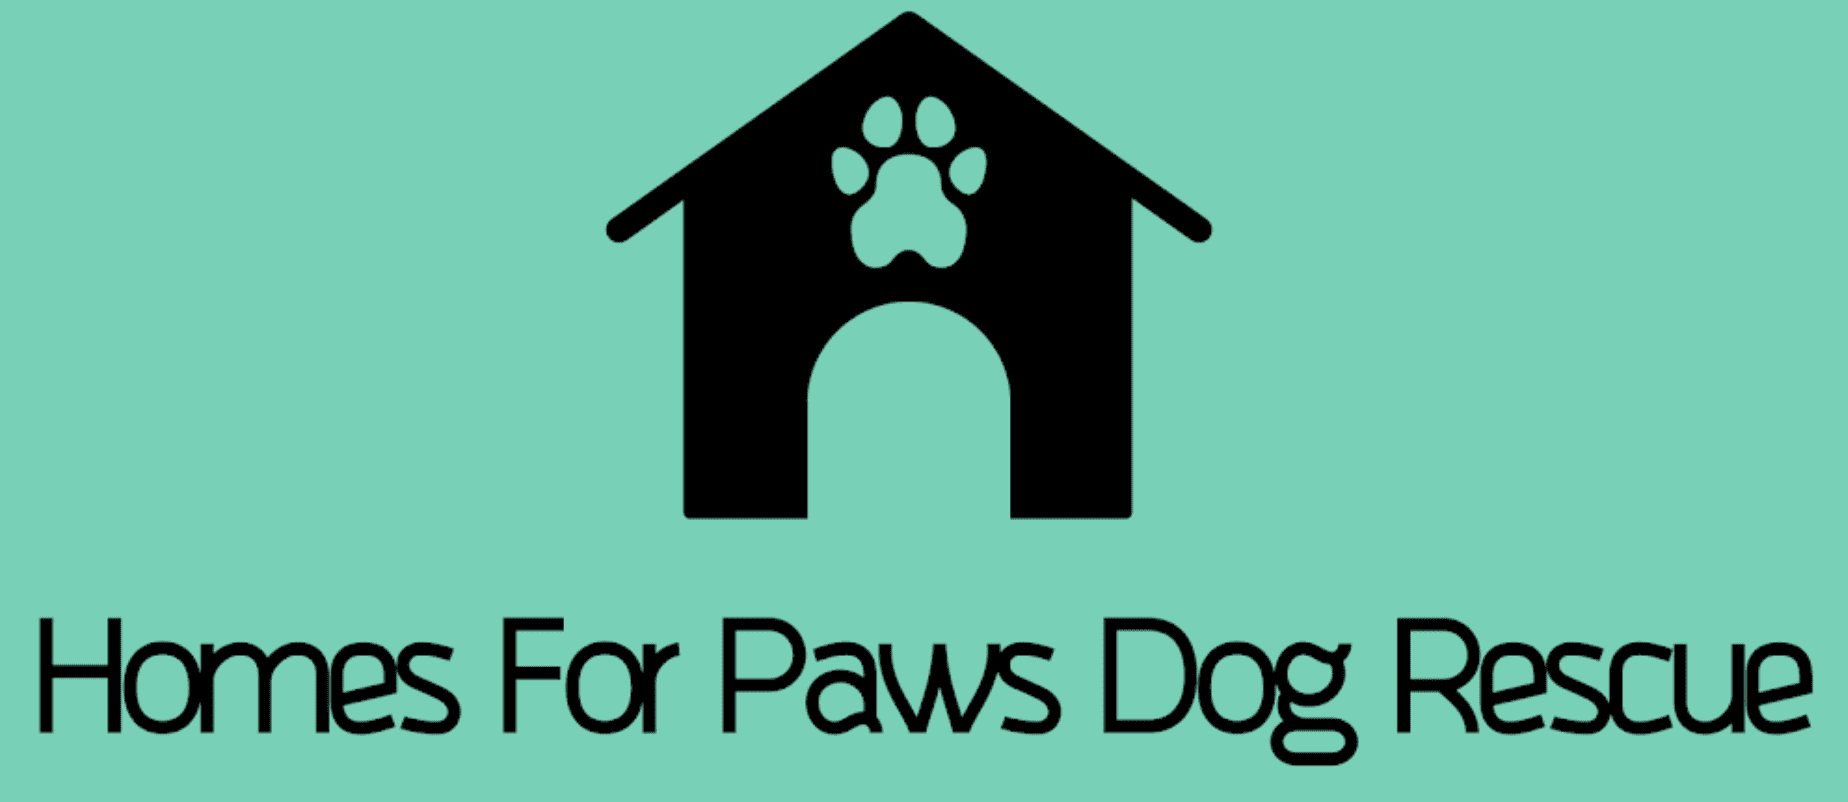 Homes for Paws Dog Rescue